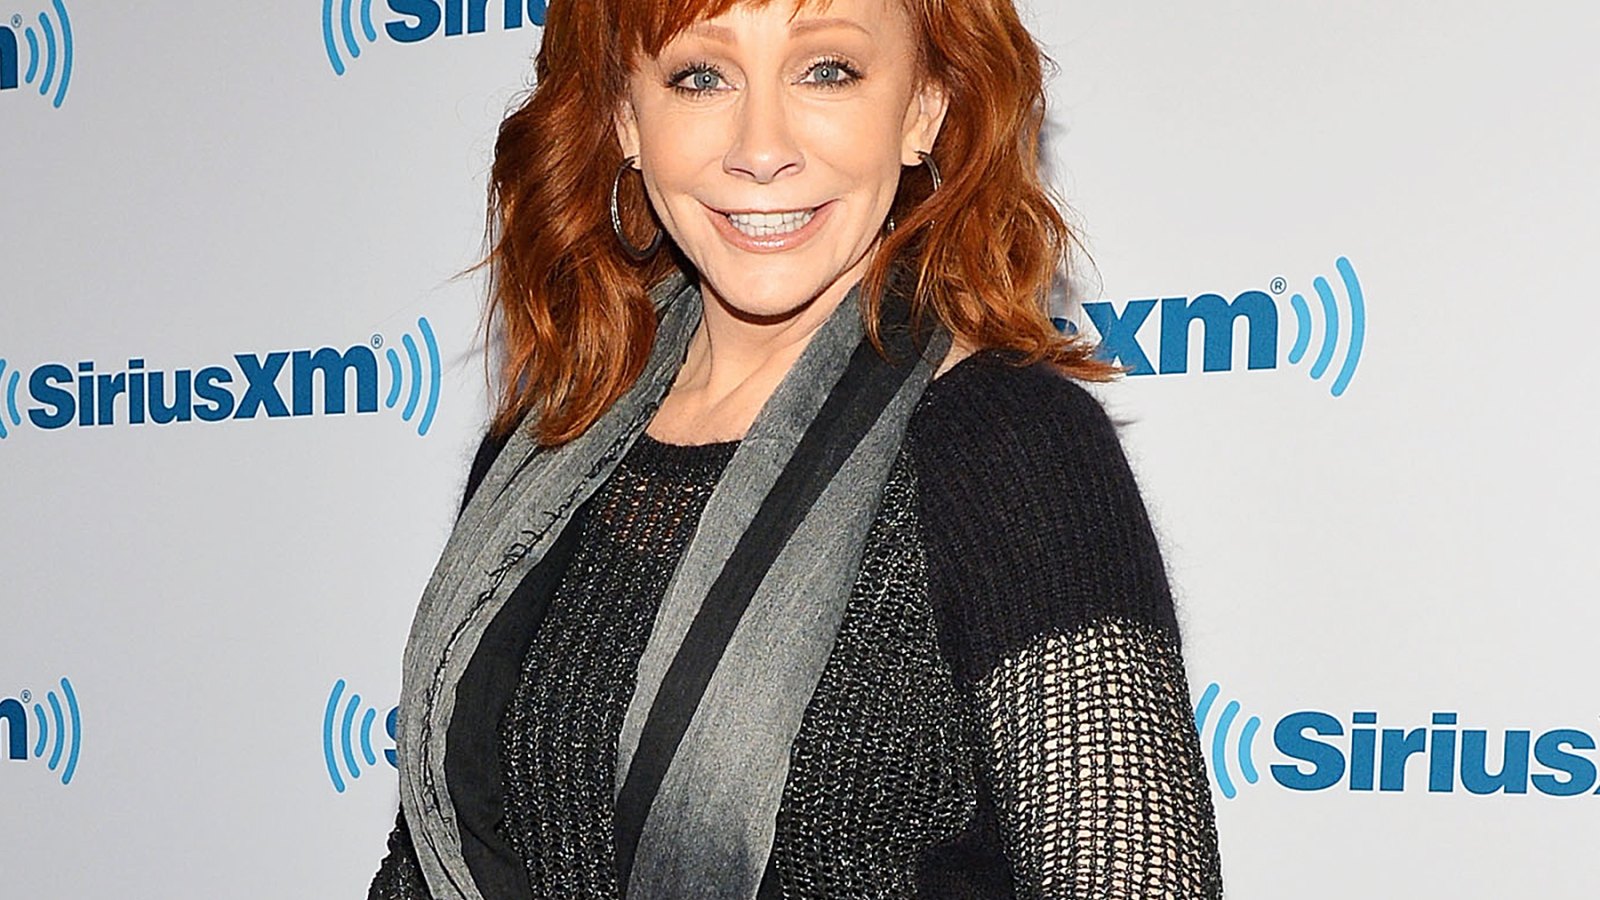 25 Things You Don't Know About Reba McEntire